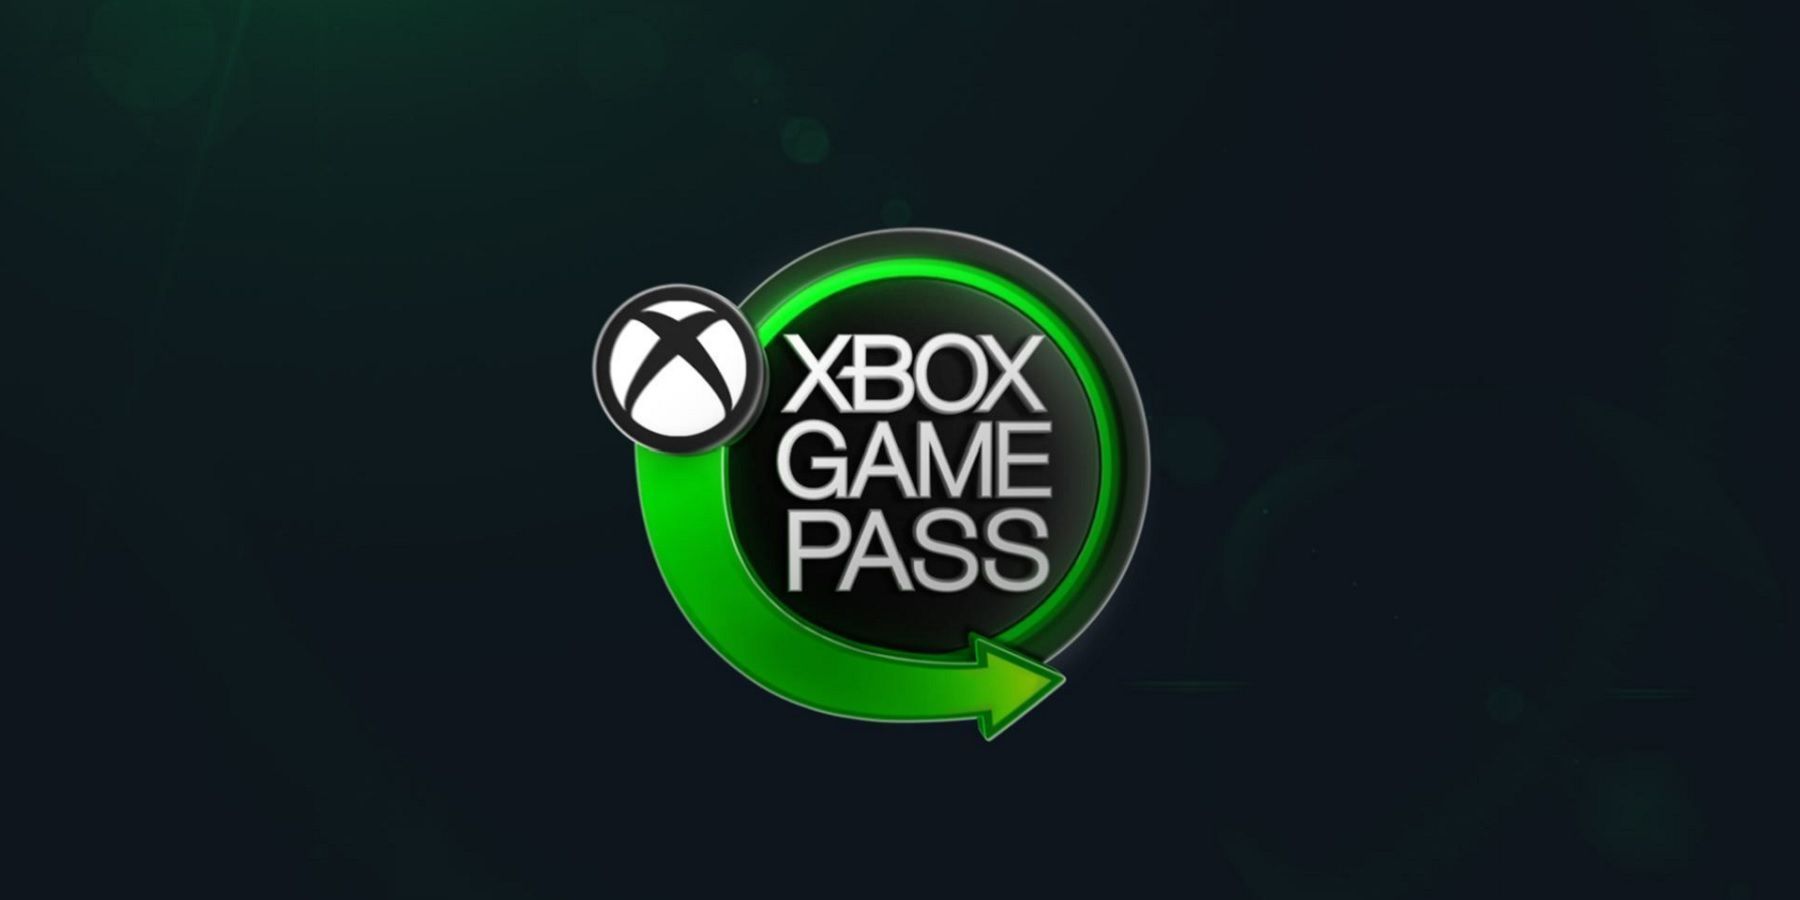 Xbox Game Pass Reveals Two New Games for March 2023, Including Day One Title